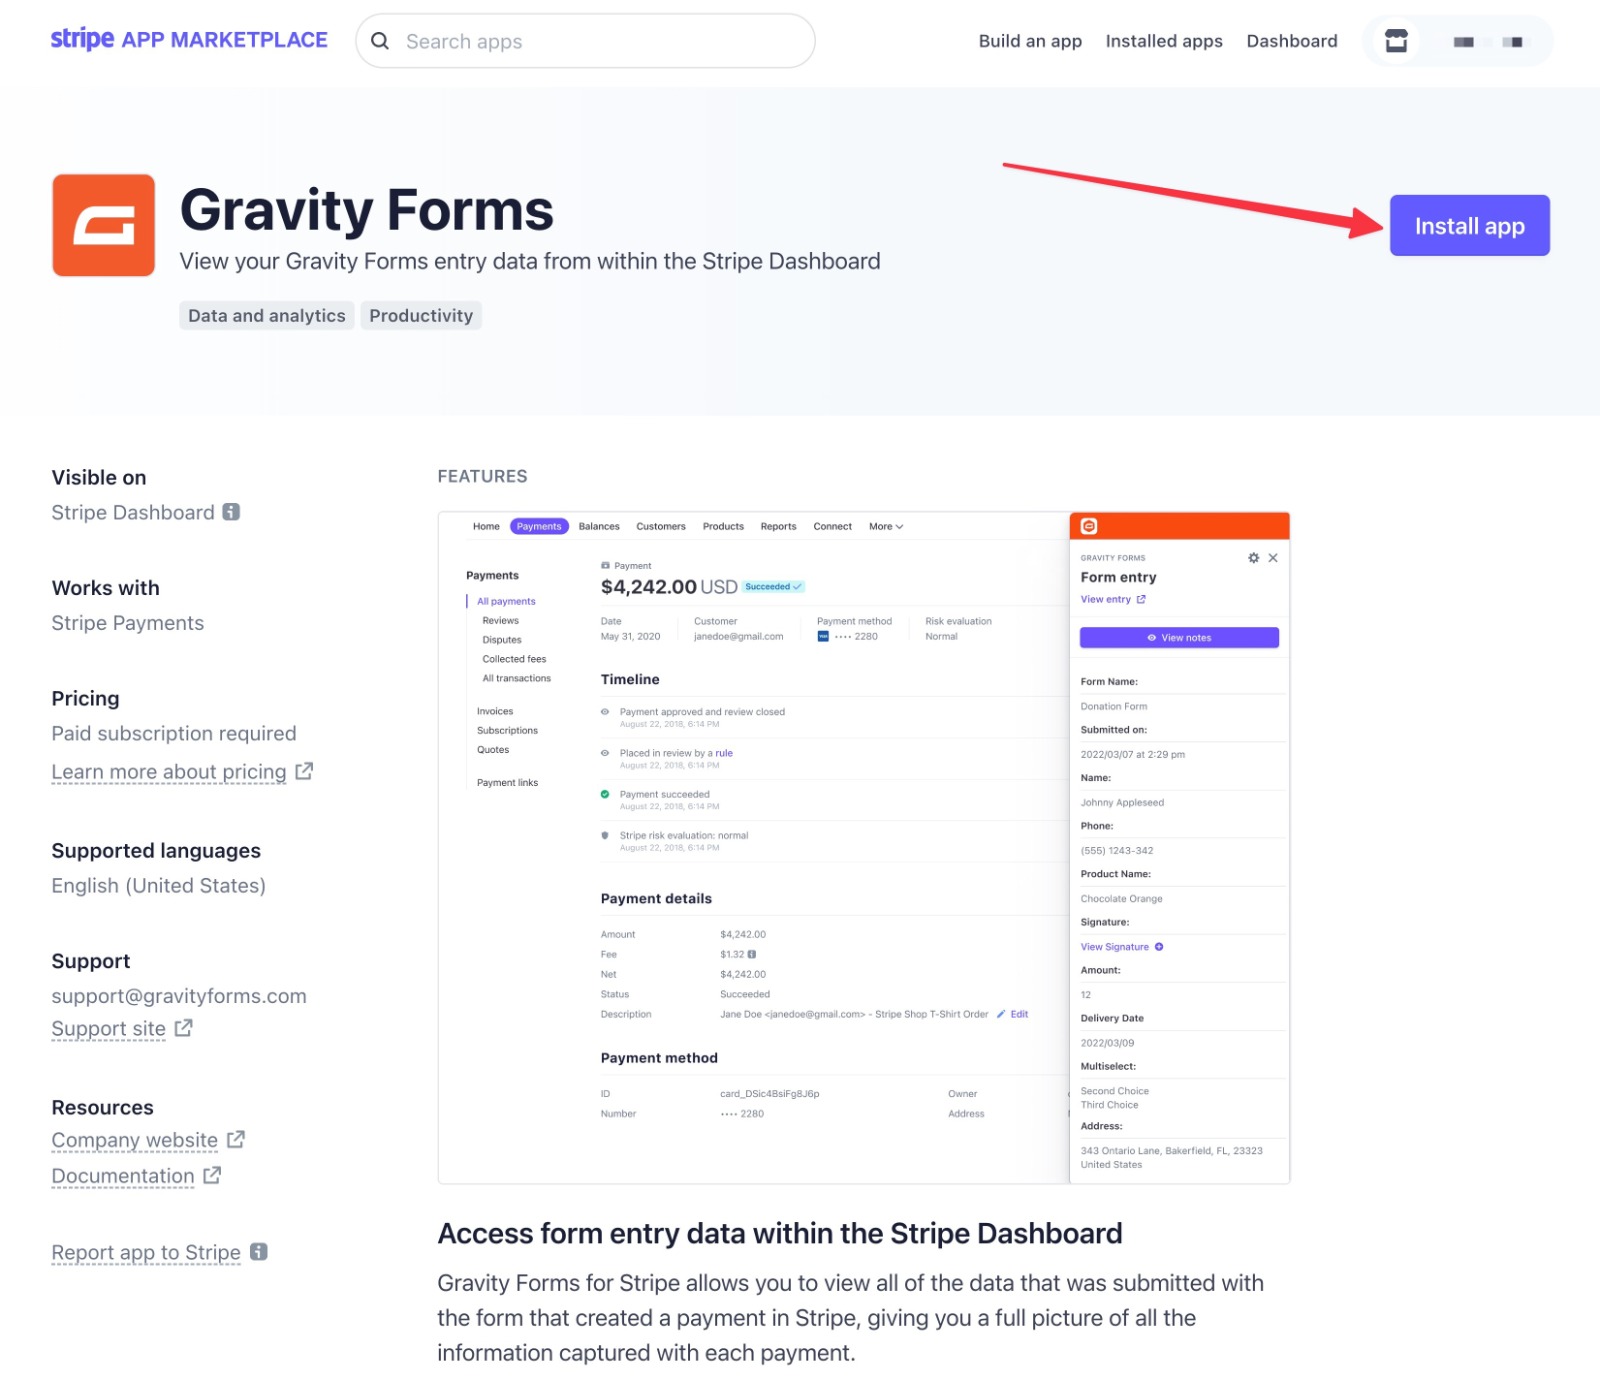 How to install the Gravity Forms Stripe app